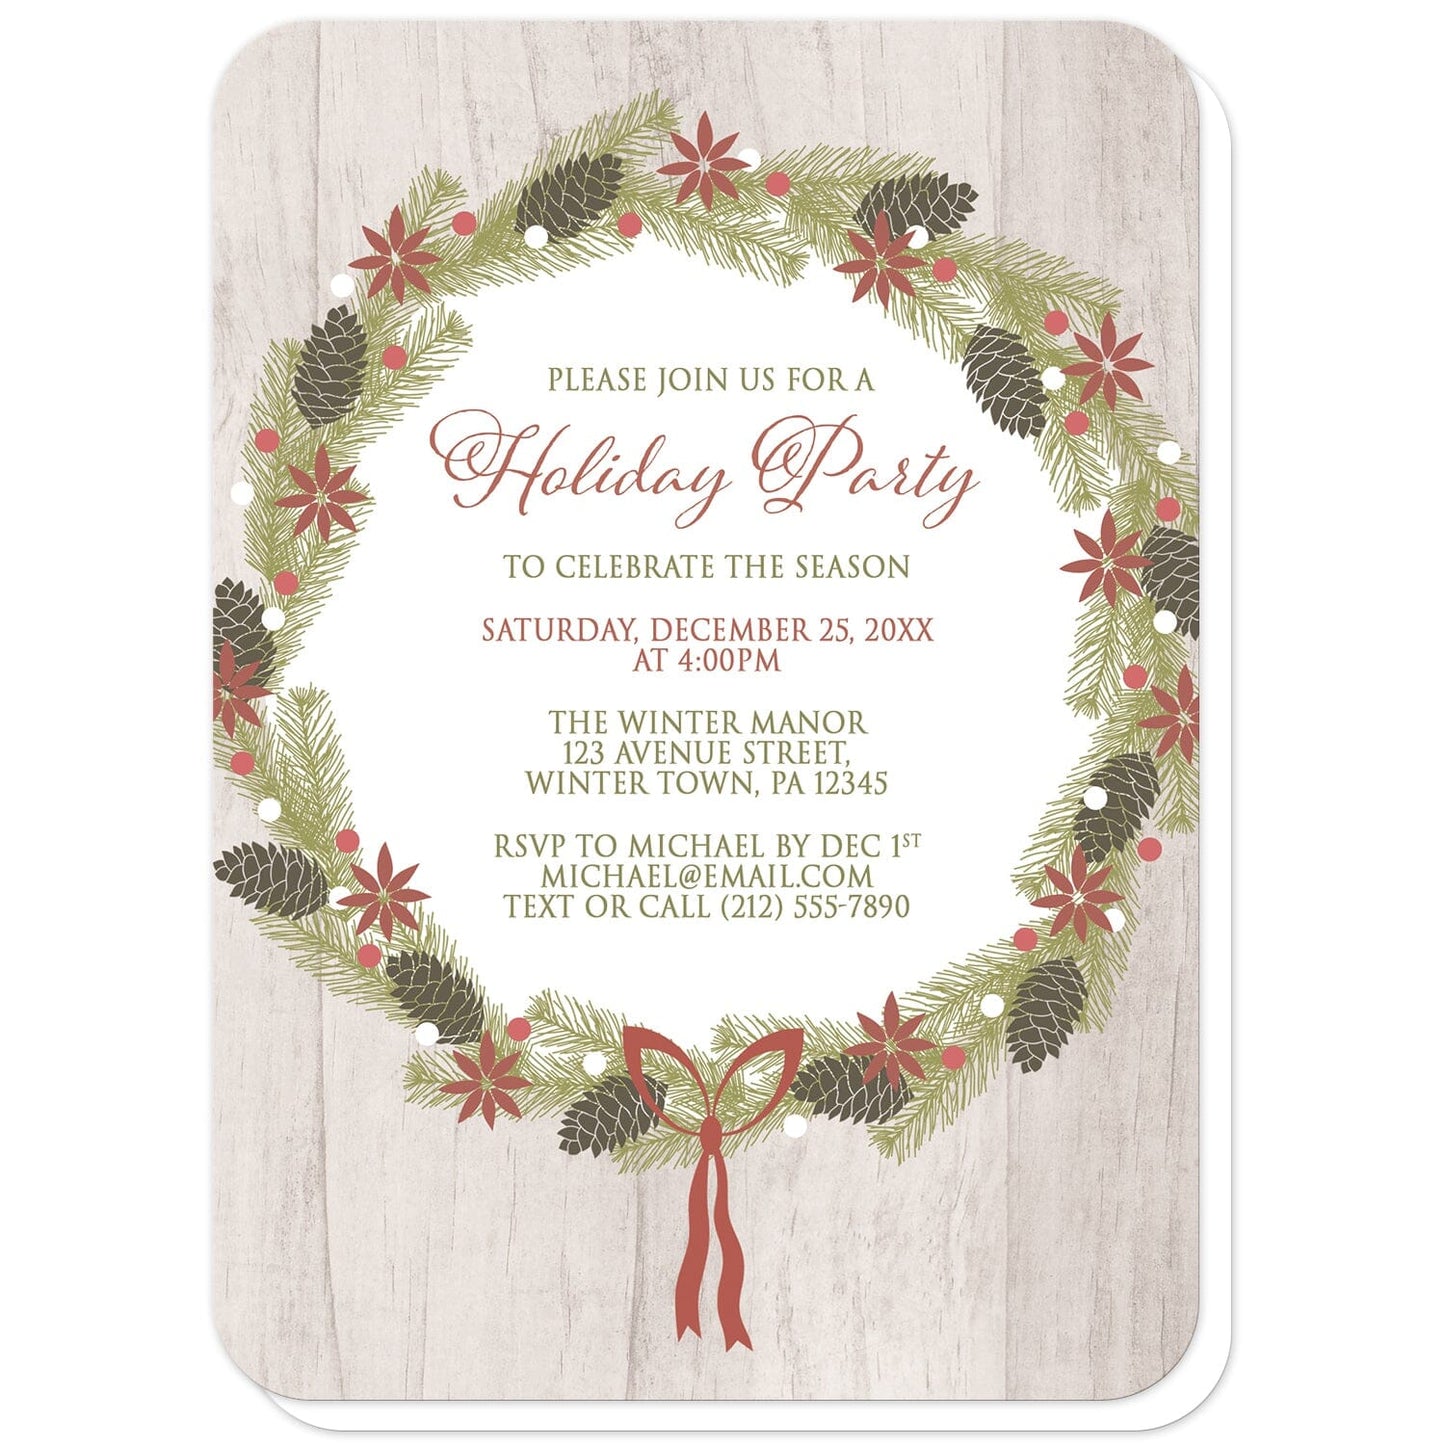 Rustic Poinsettia Pine Cone Wreath Holiday Invitations (with rounded corners) at Artistically Invited. Rustic poinsettia pine cone wreath holiday invitations designed with a poinsettia, pine cone, and pine boughs wreath over a light wood background illustration. Your personalized holiday party details are custom printed in faded red and green over white in the center of this holiday wreath.